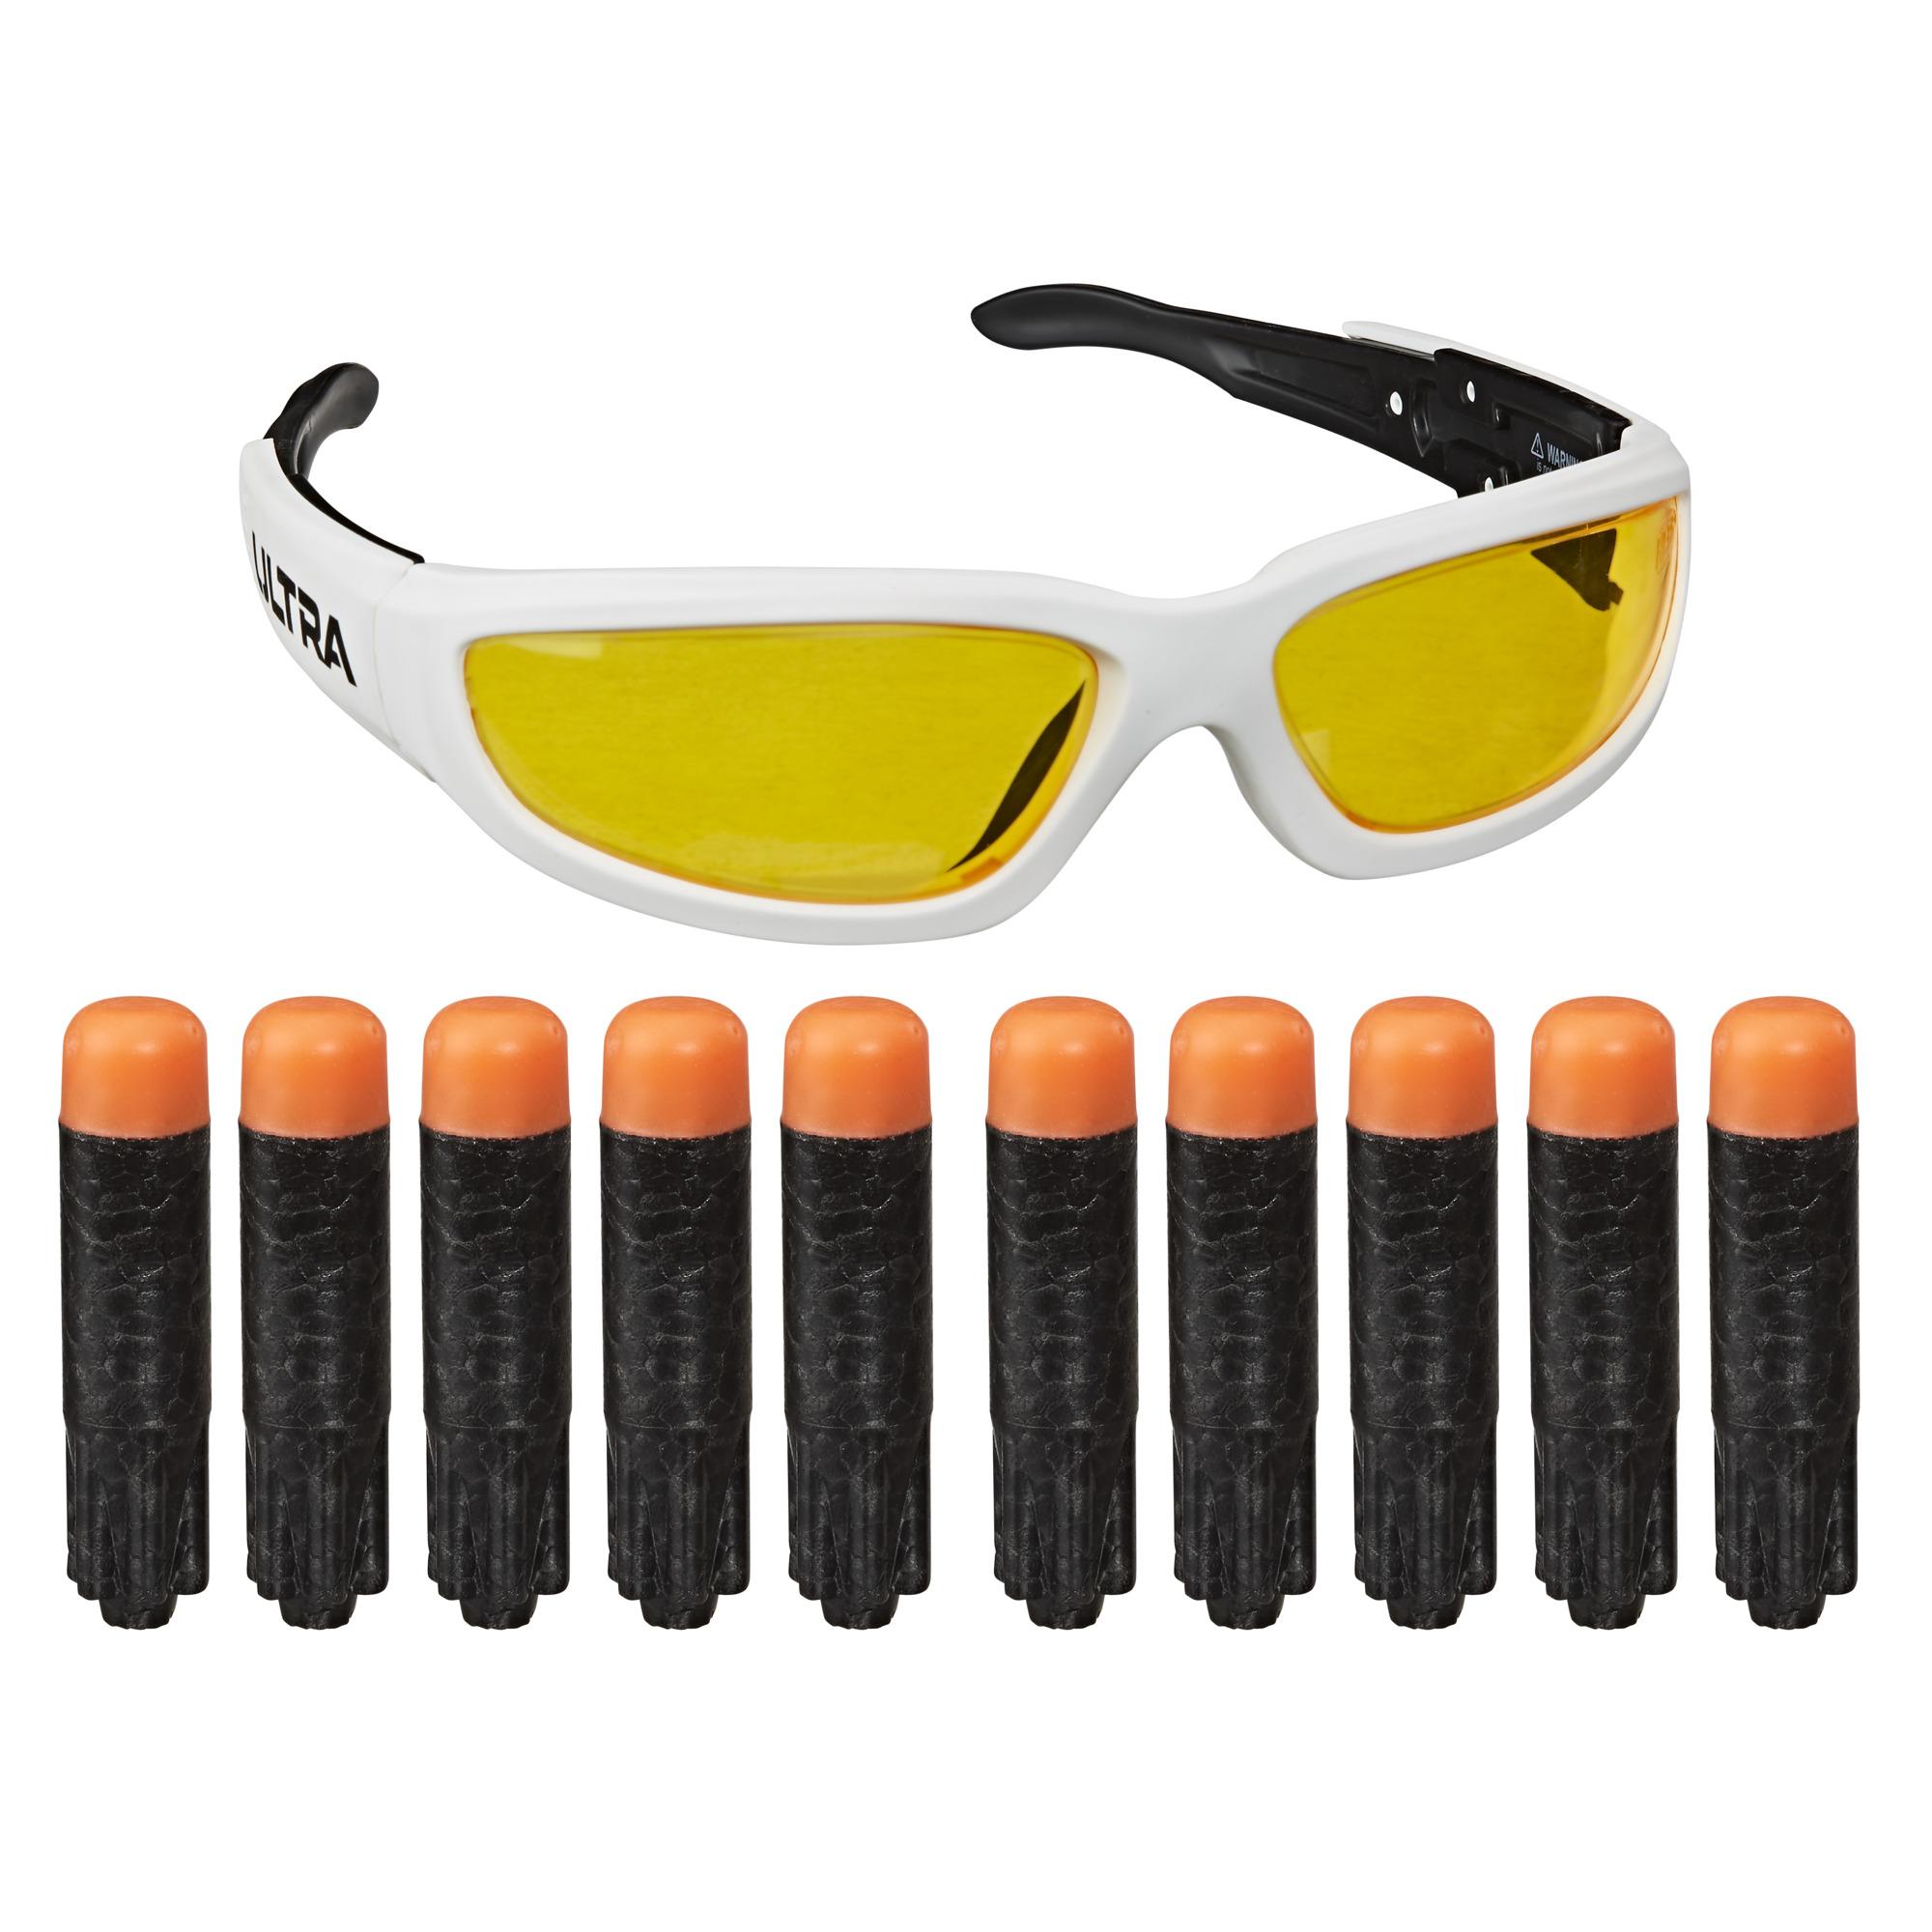 Nerf Ultra Eye Protection With Dart E9836 Hasbro for sale online 